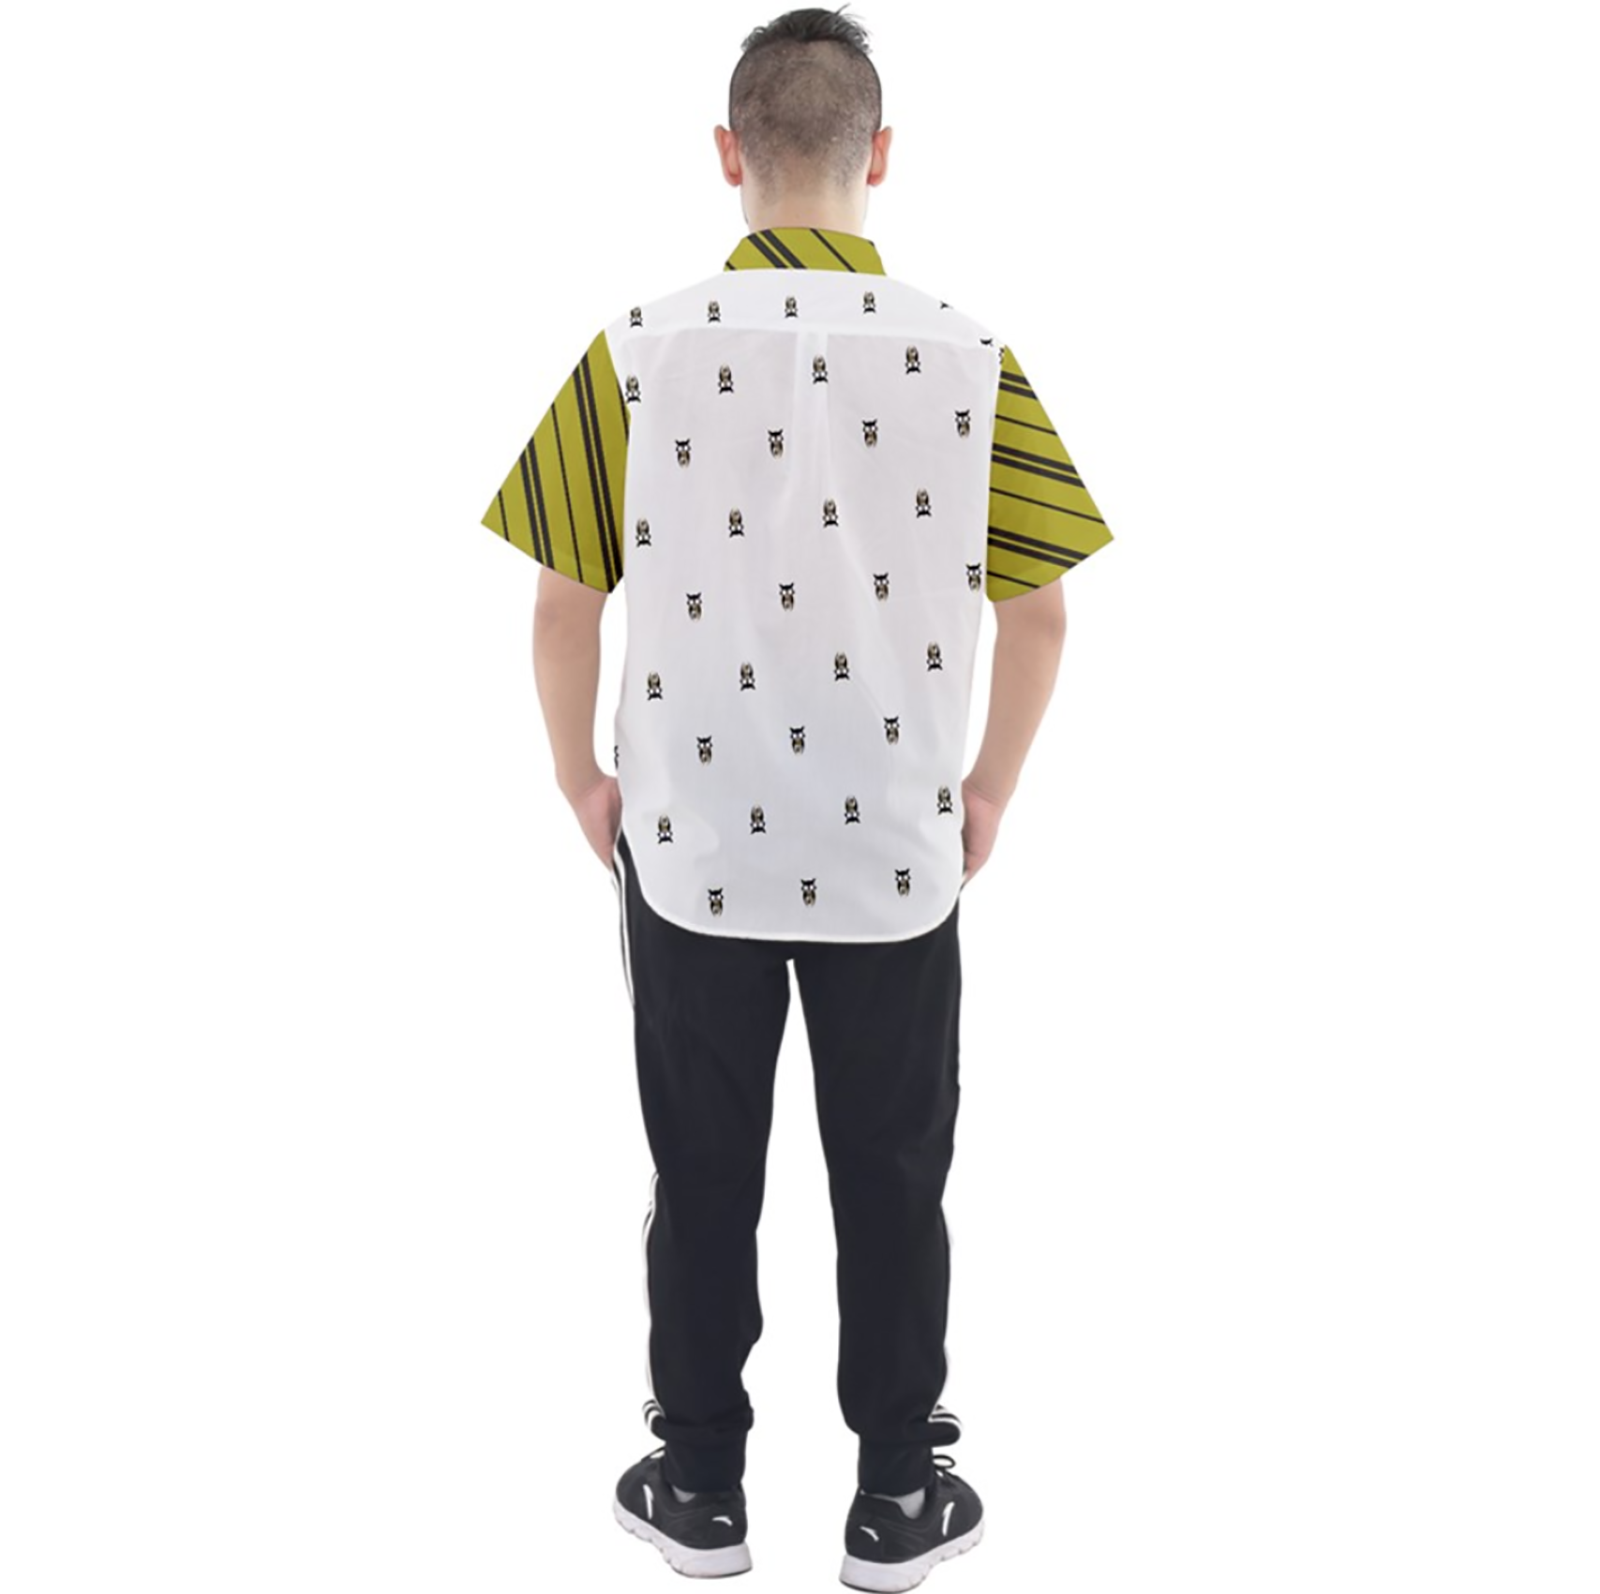 Yellow & Black Owl Patterned Button Up Short Sleeve Shirt - Inspired by Hufflepuff House